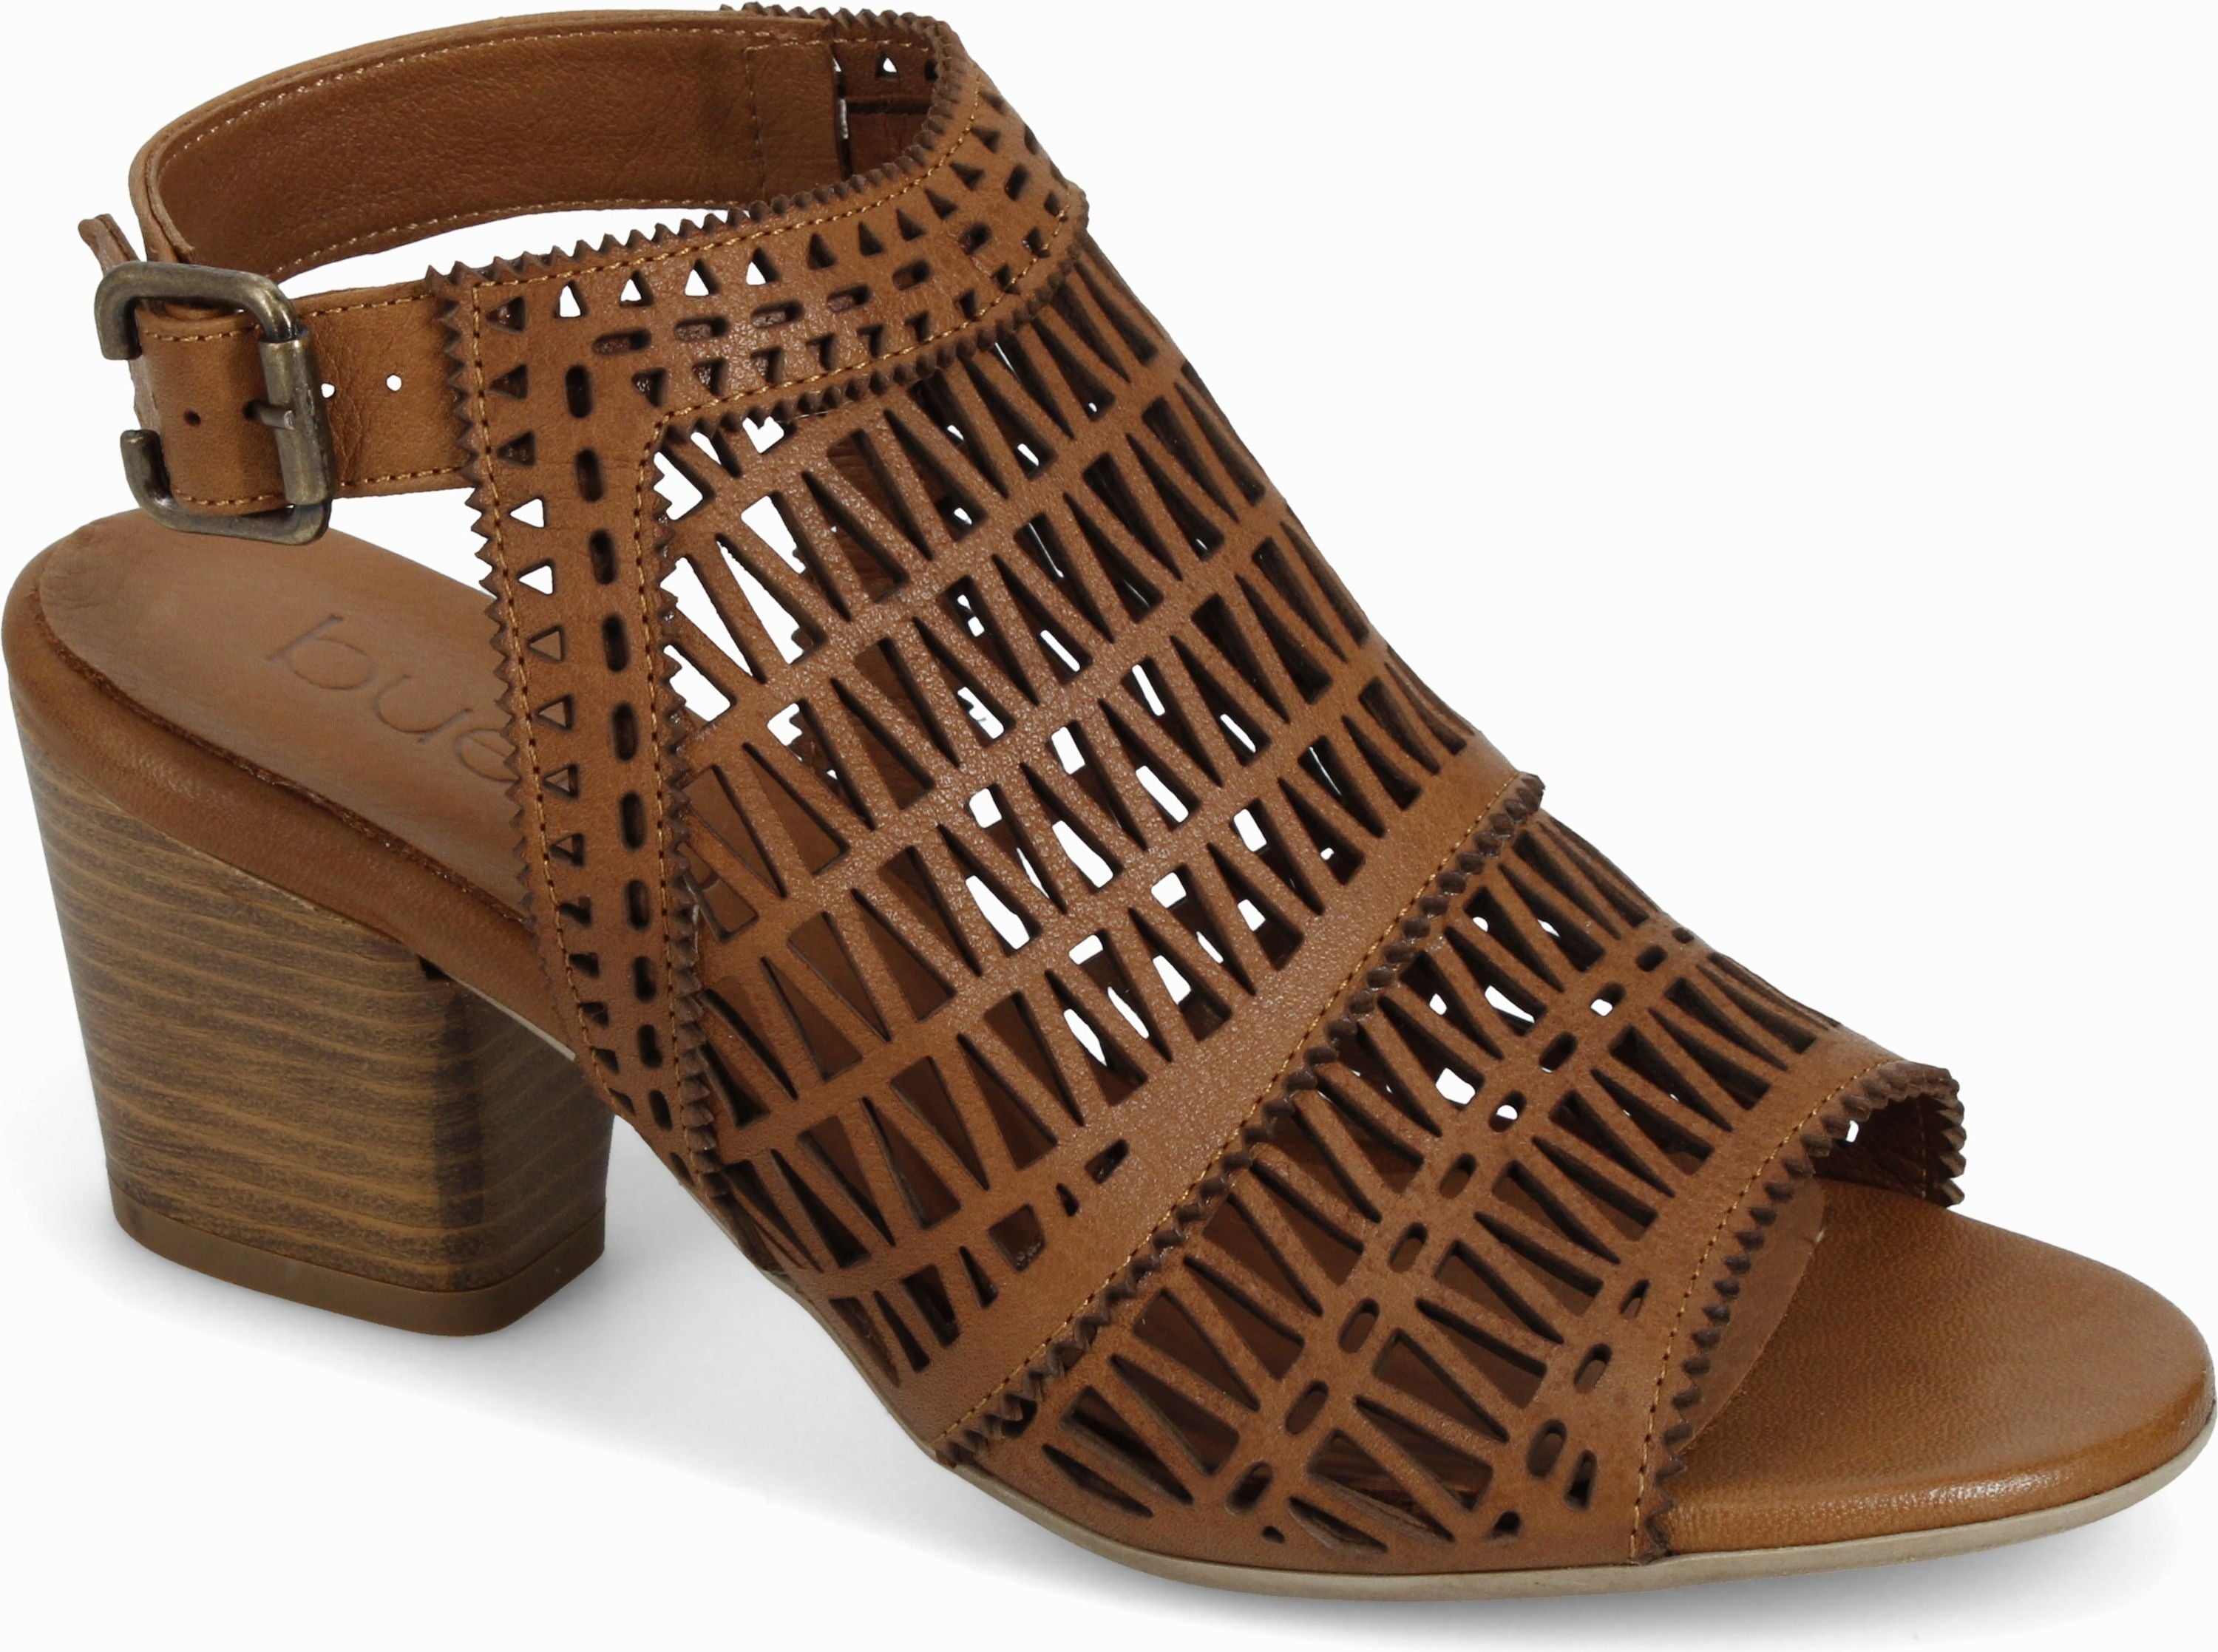 Lib Peep Toe Stiletto Heels Back Zipper Summer Spring Sandals Boots - Brown  in Sexy Boots - $64.67